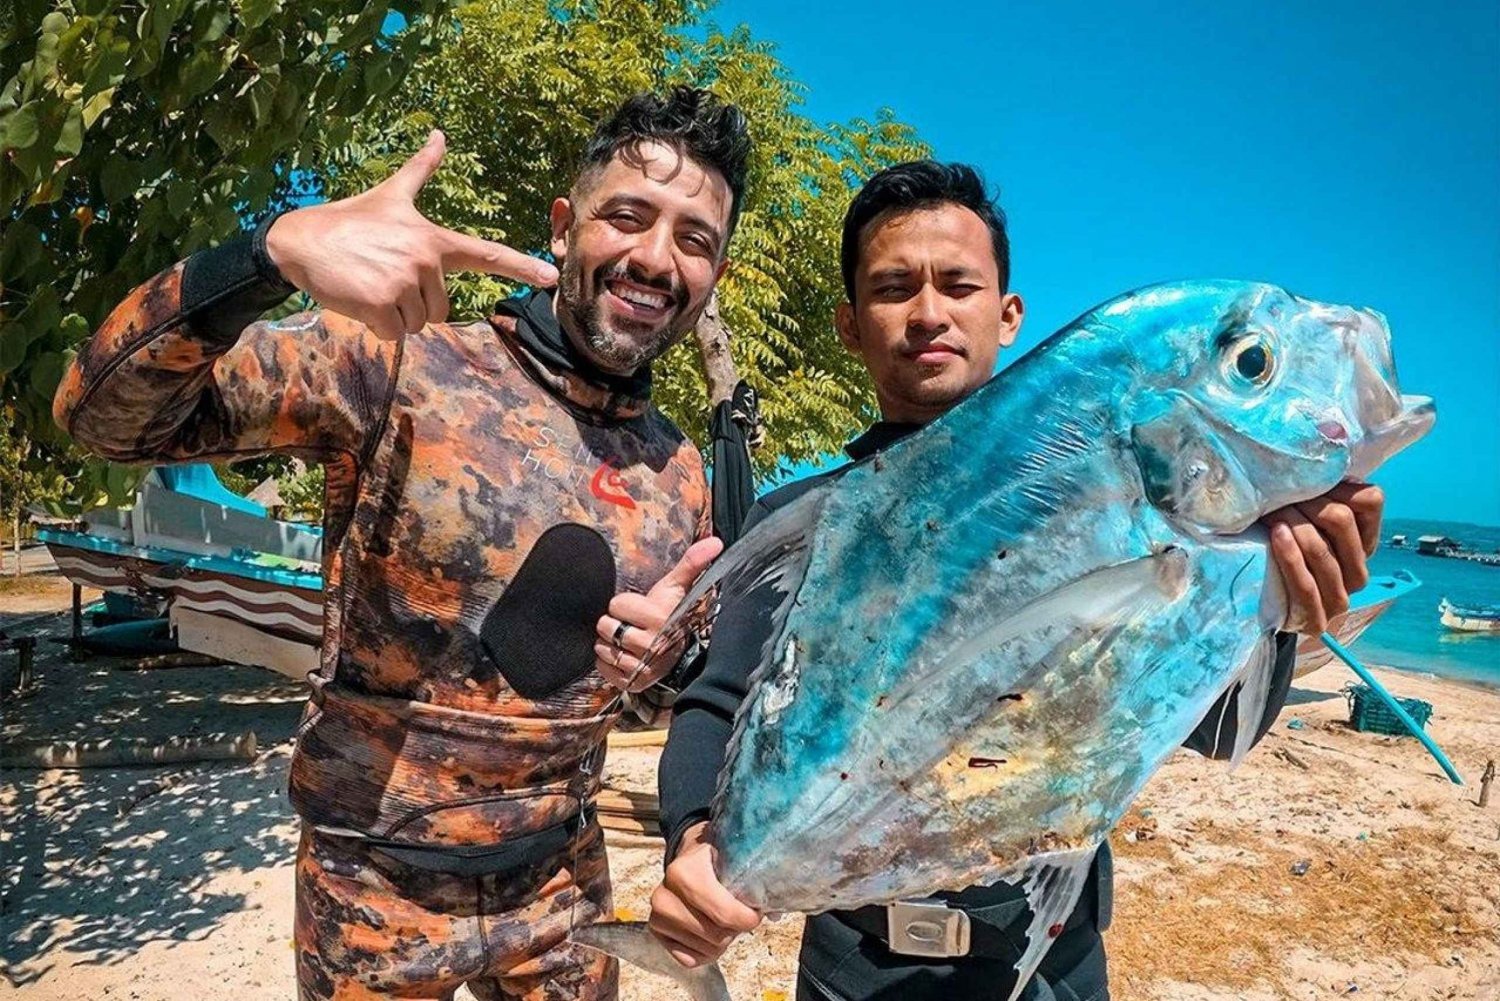 Lombok Spearfishing: The Thrill of Hunting in Tropical Seas